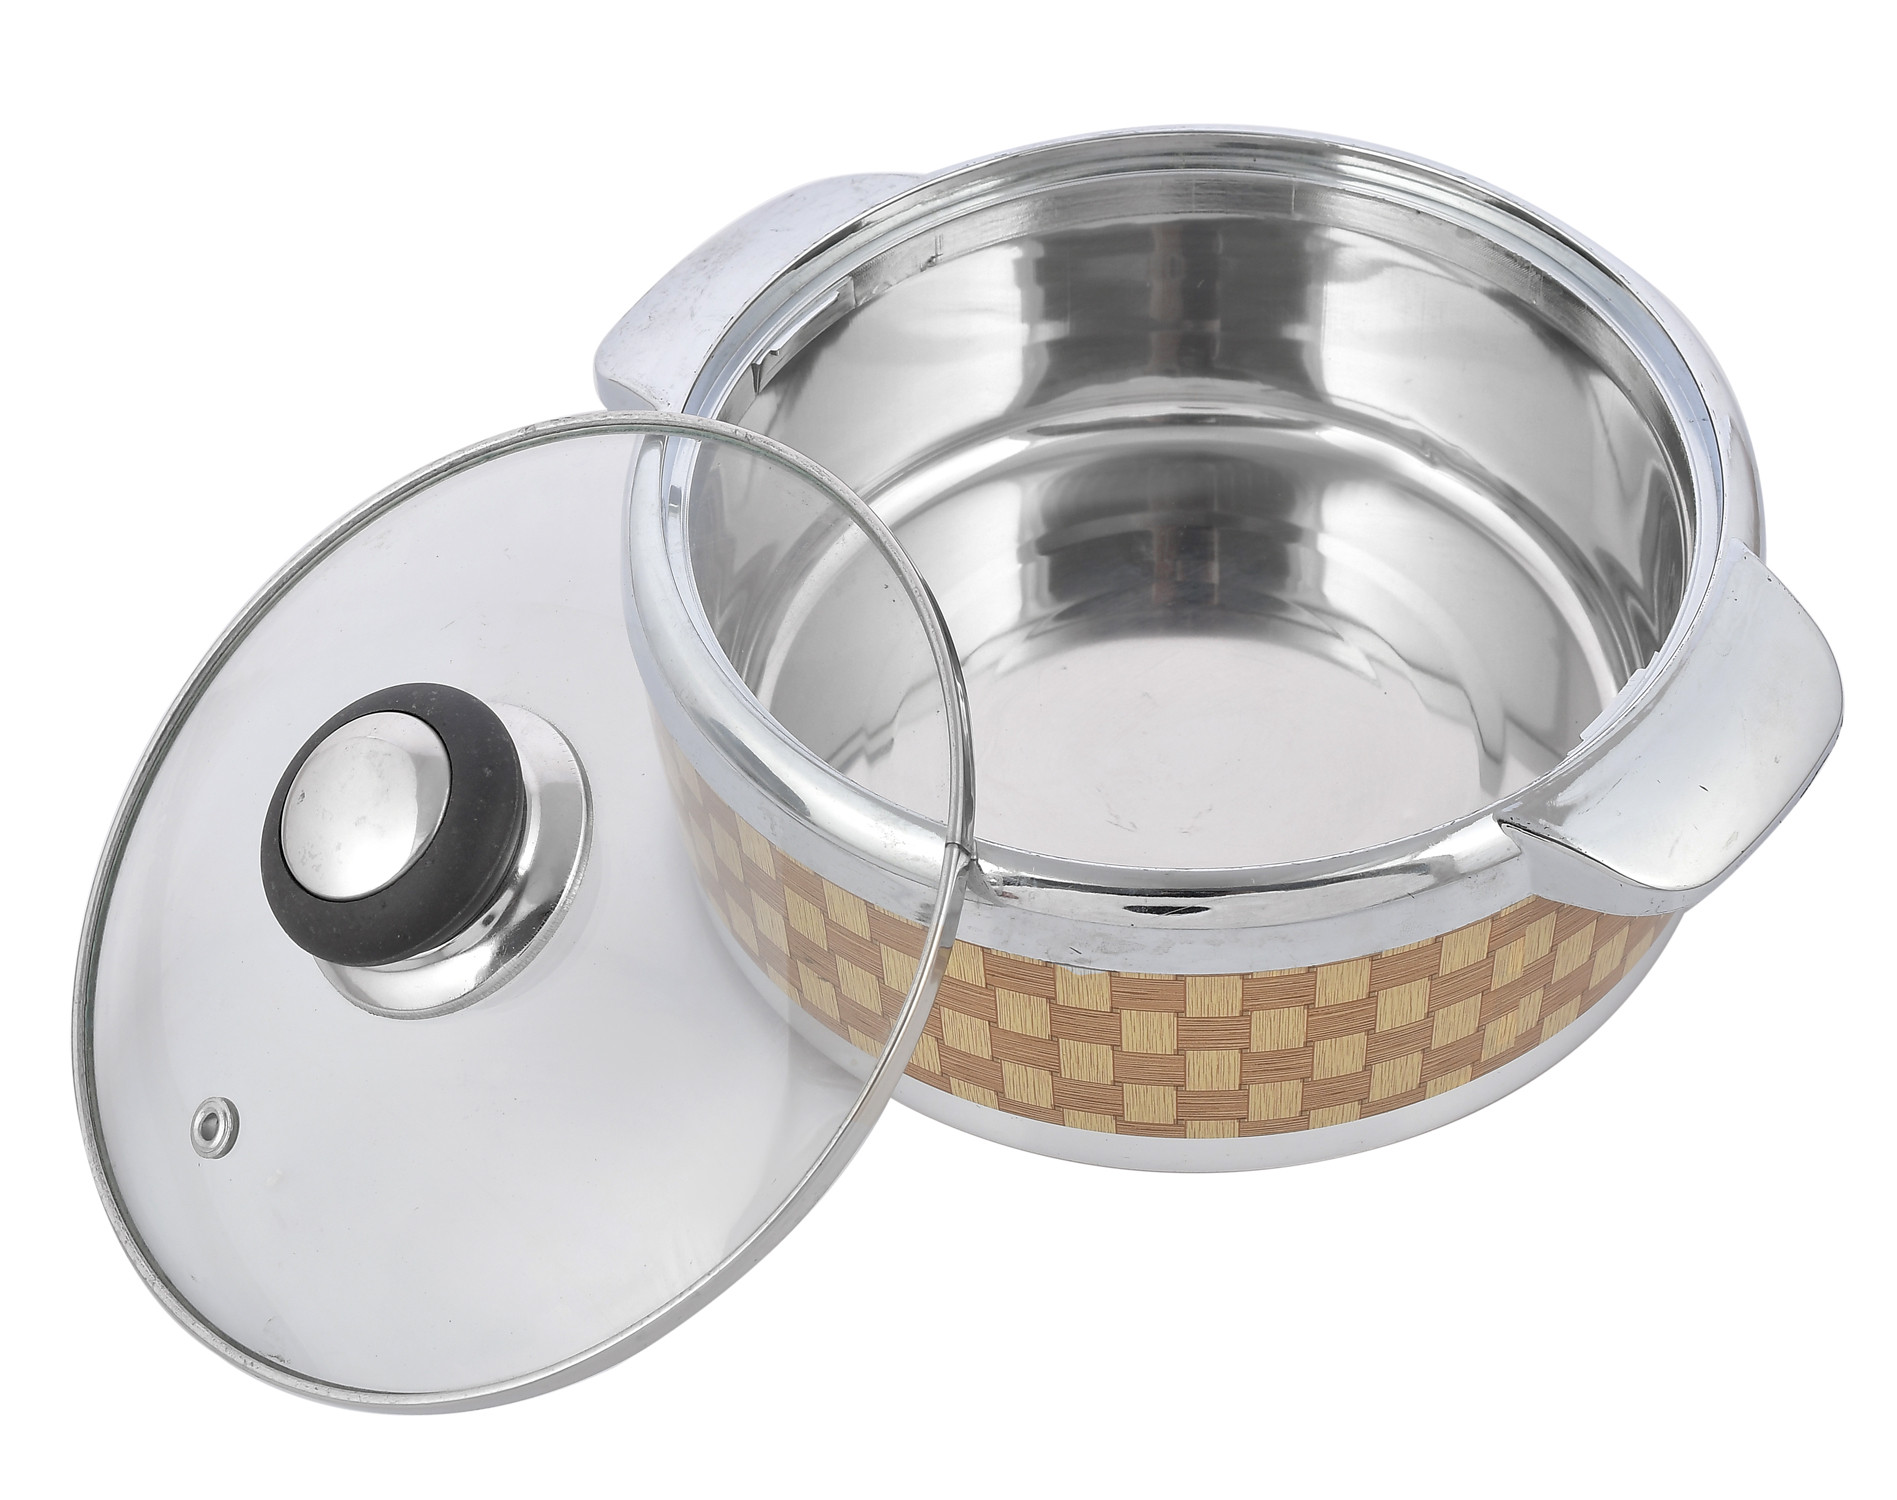 Kuber Industries Check Printed Inner Steel Casserole With Toughened Glass Lid, 1500ml (Brown)-HS42KUBMART25021